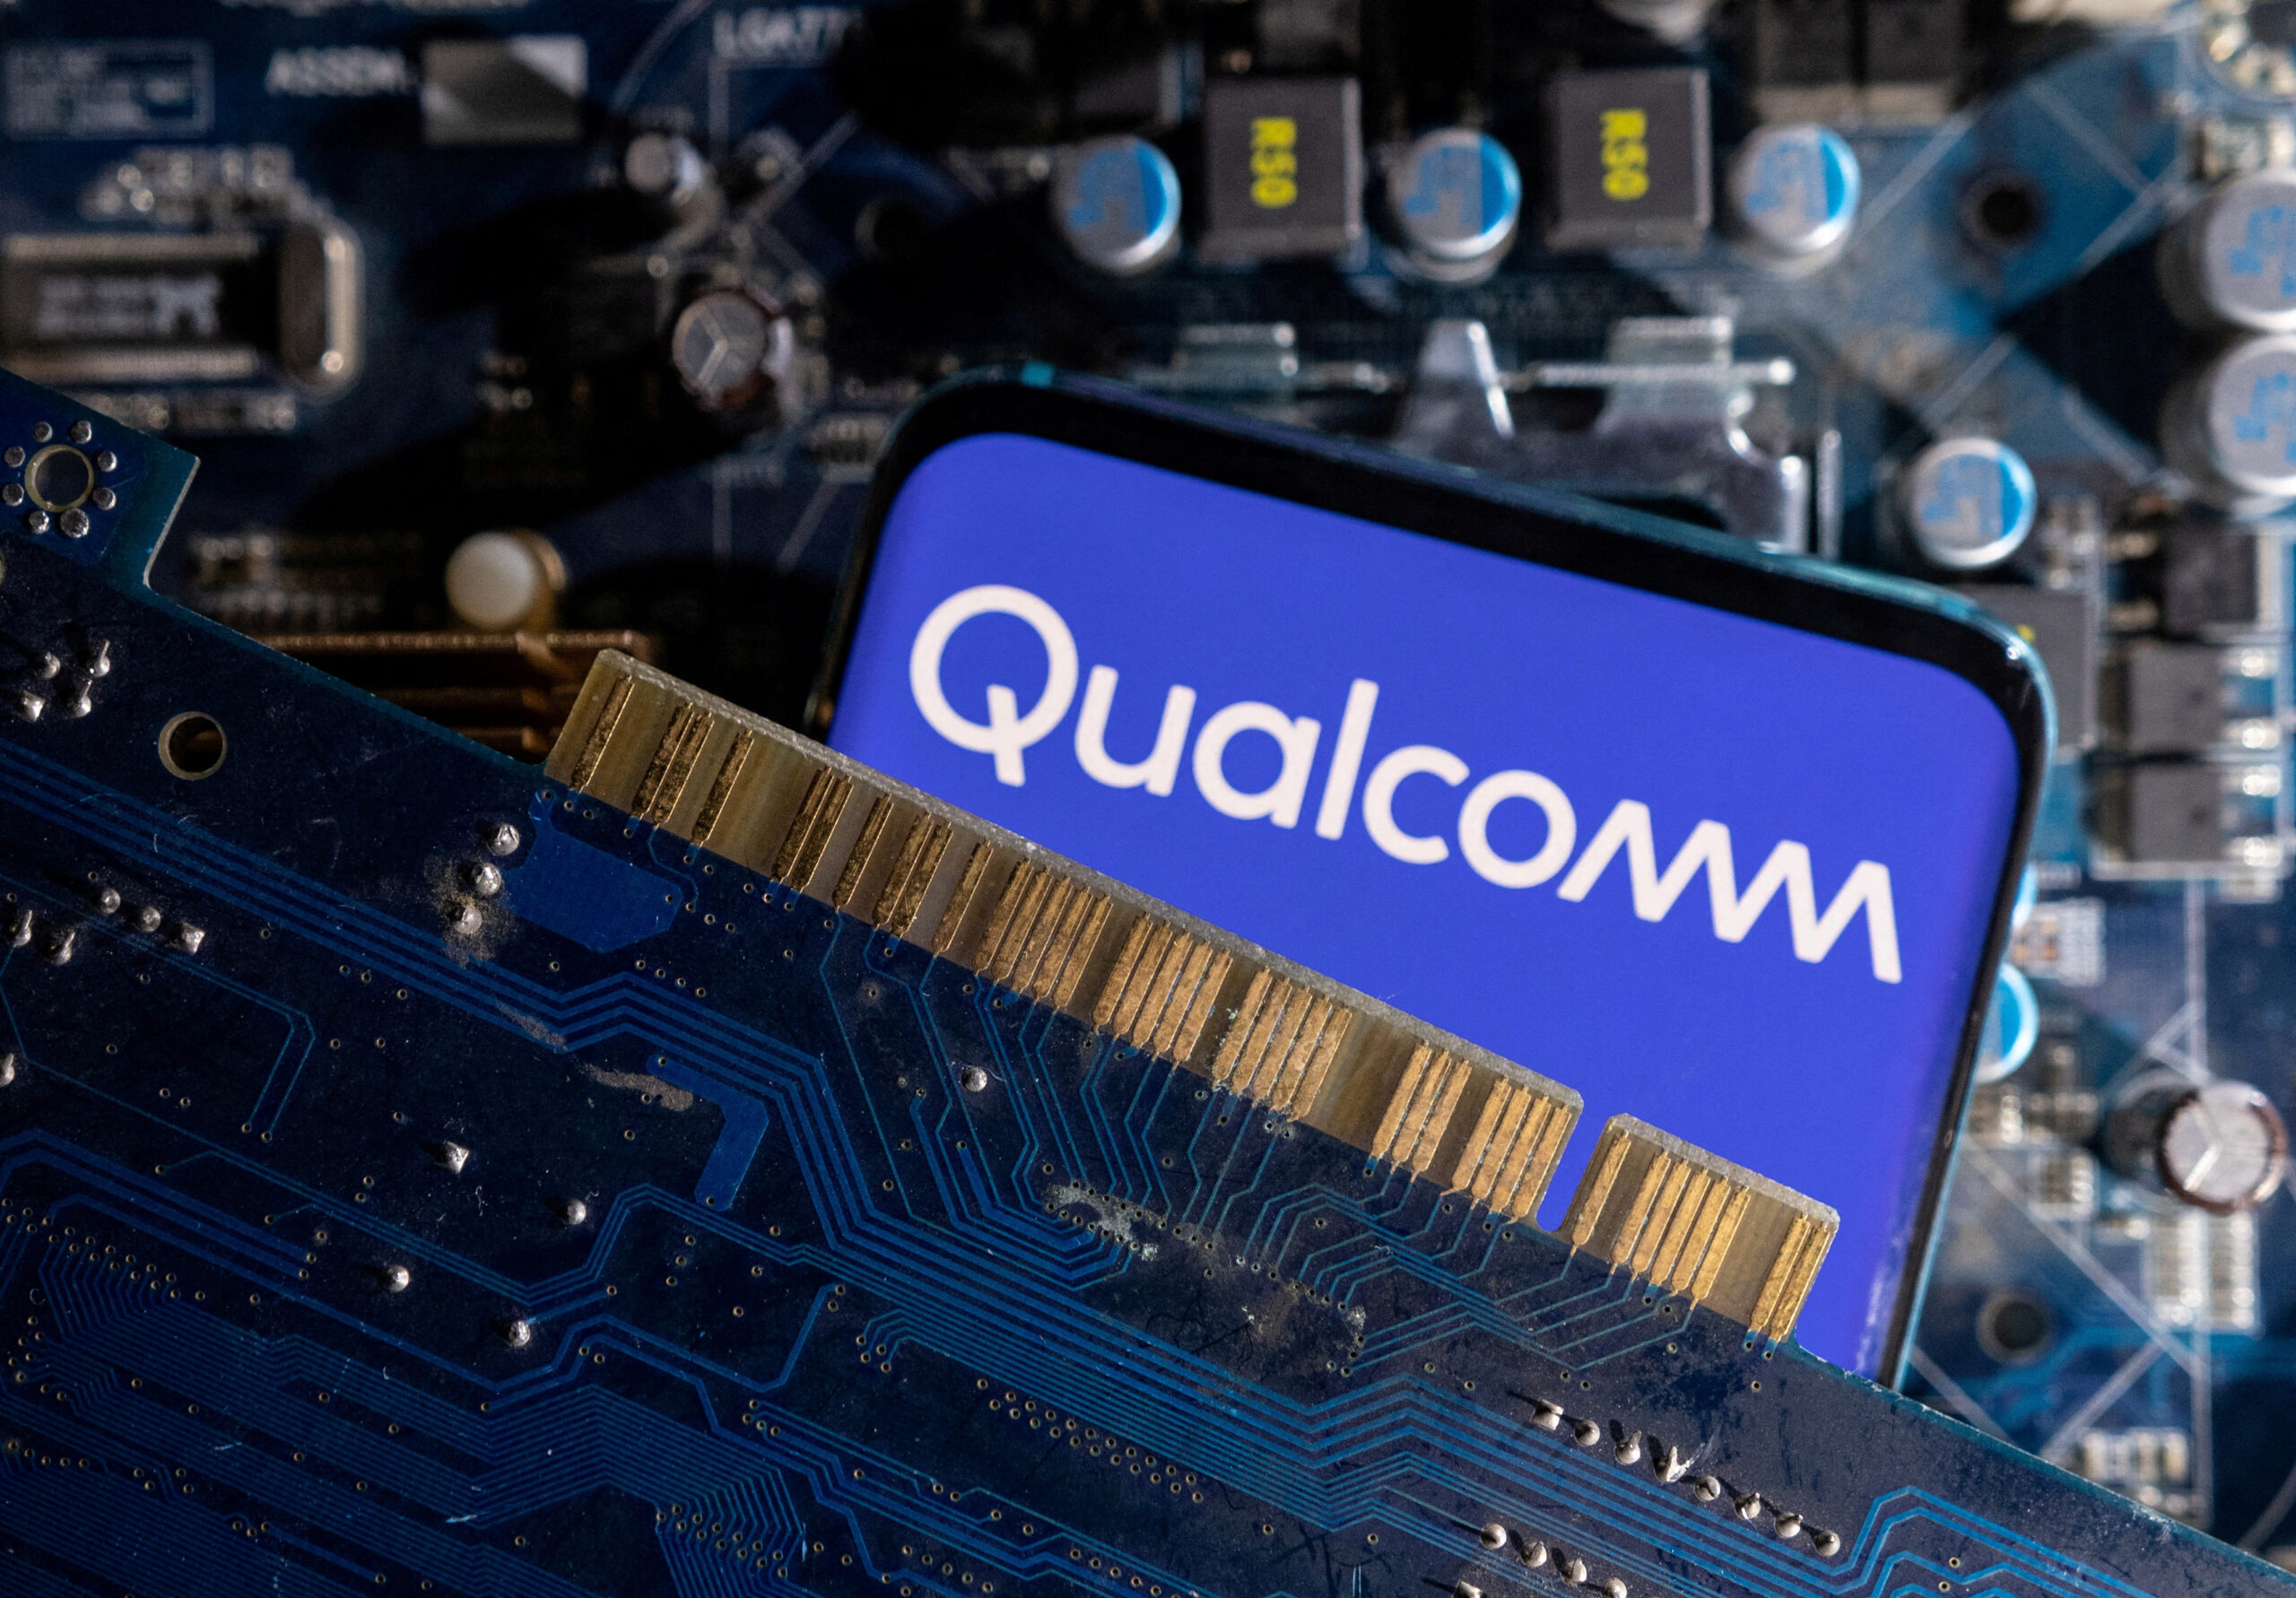 Qualcomm is probably going to hold 80% of the market for GenAI smartphone chips